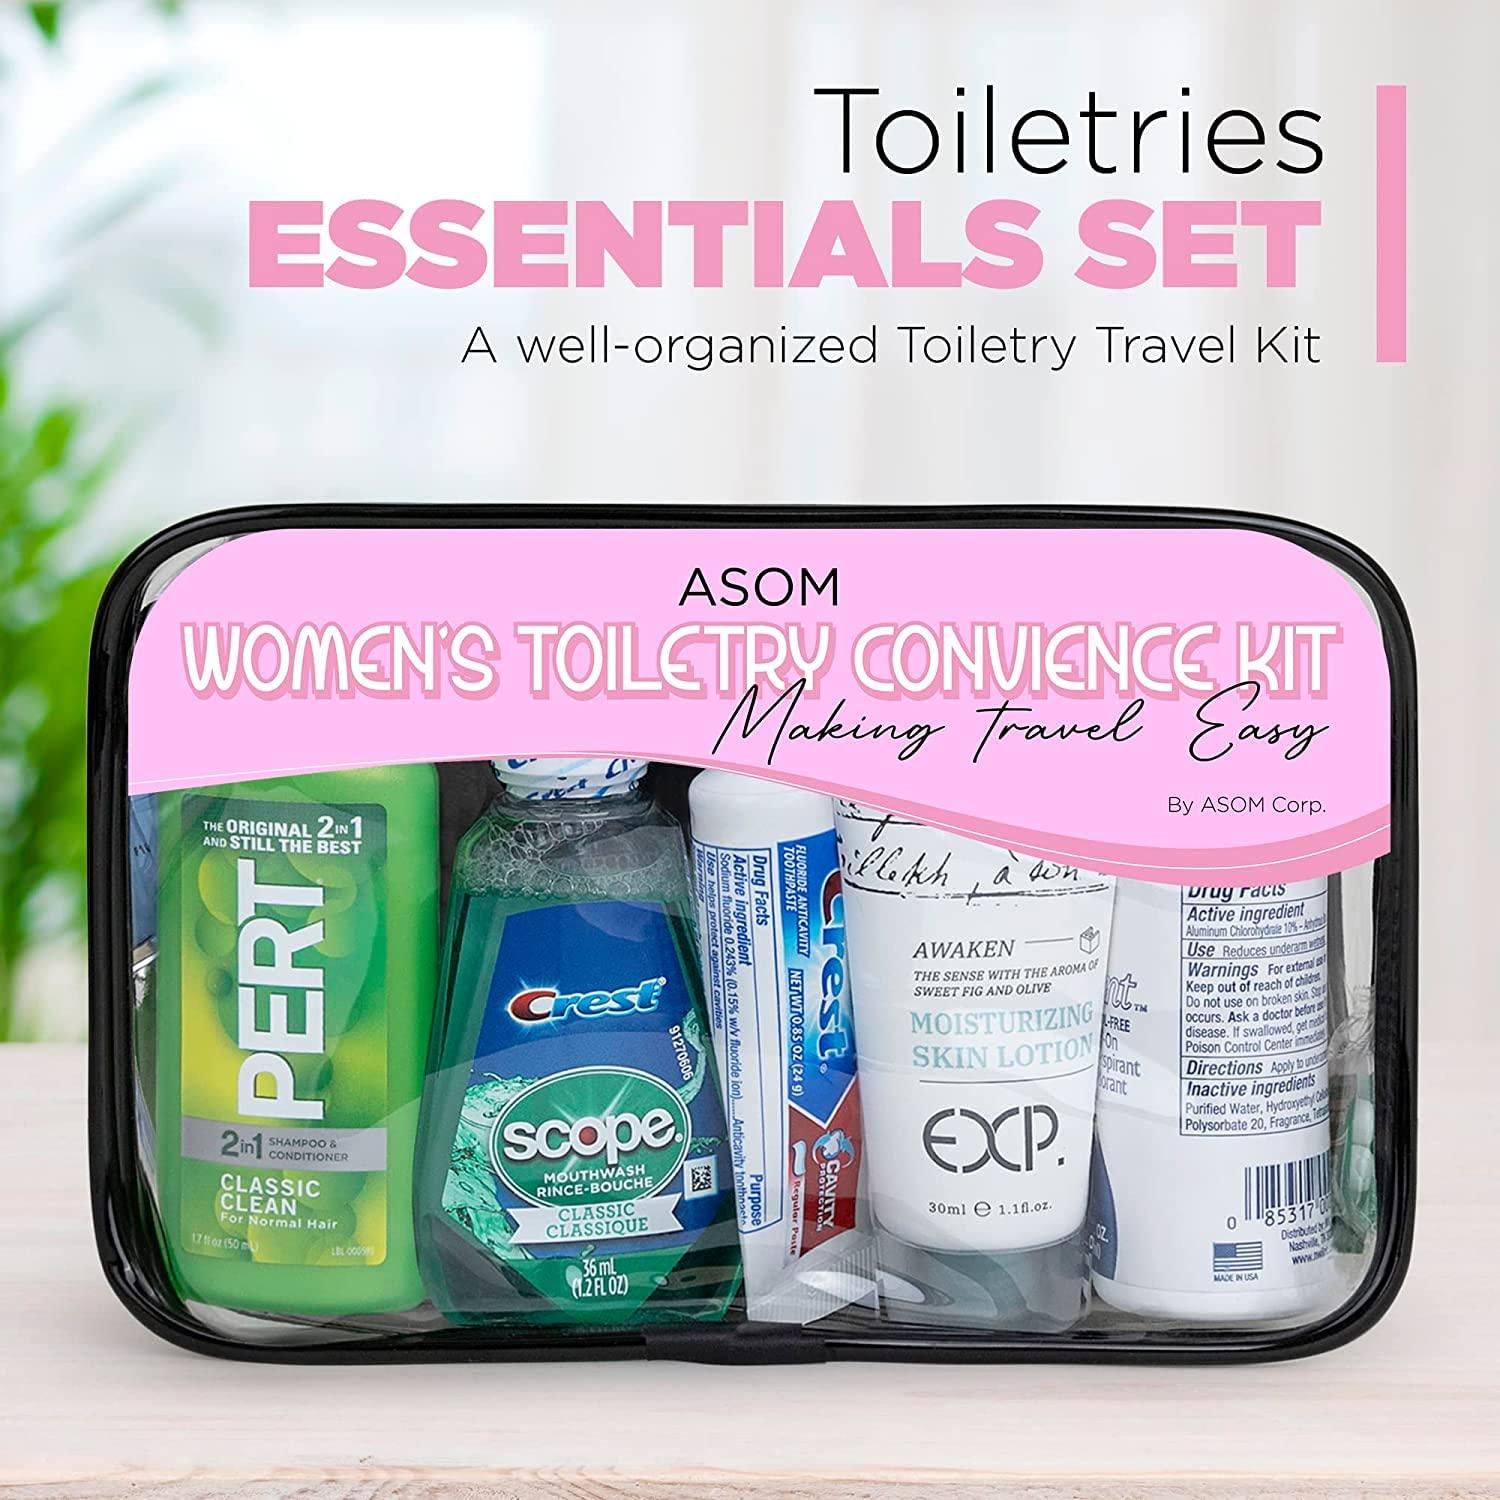 Asom Toiletry Travel Kit, Quality Hygiene Essentials Traveling Toiletries  Prefilled Accessories Convenience Set, Tsa Approved Women Carry On Size  Clear Toiletry Bag Accessory Kits.